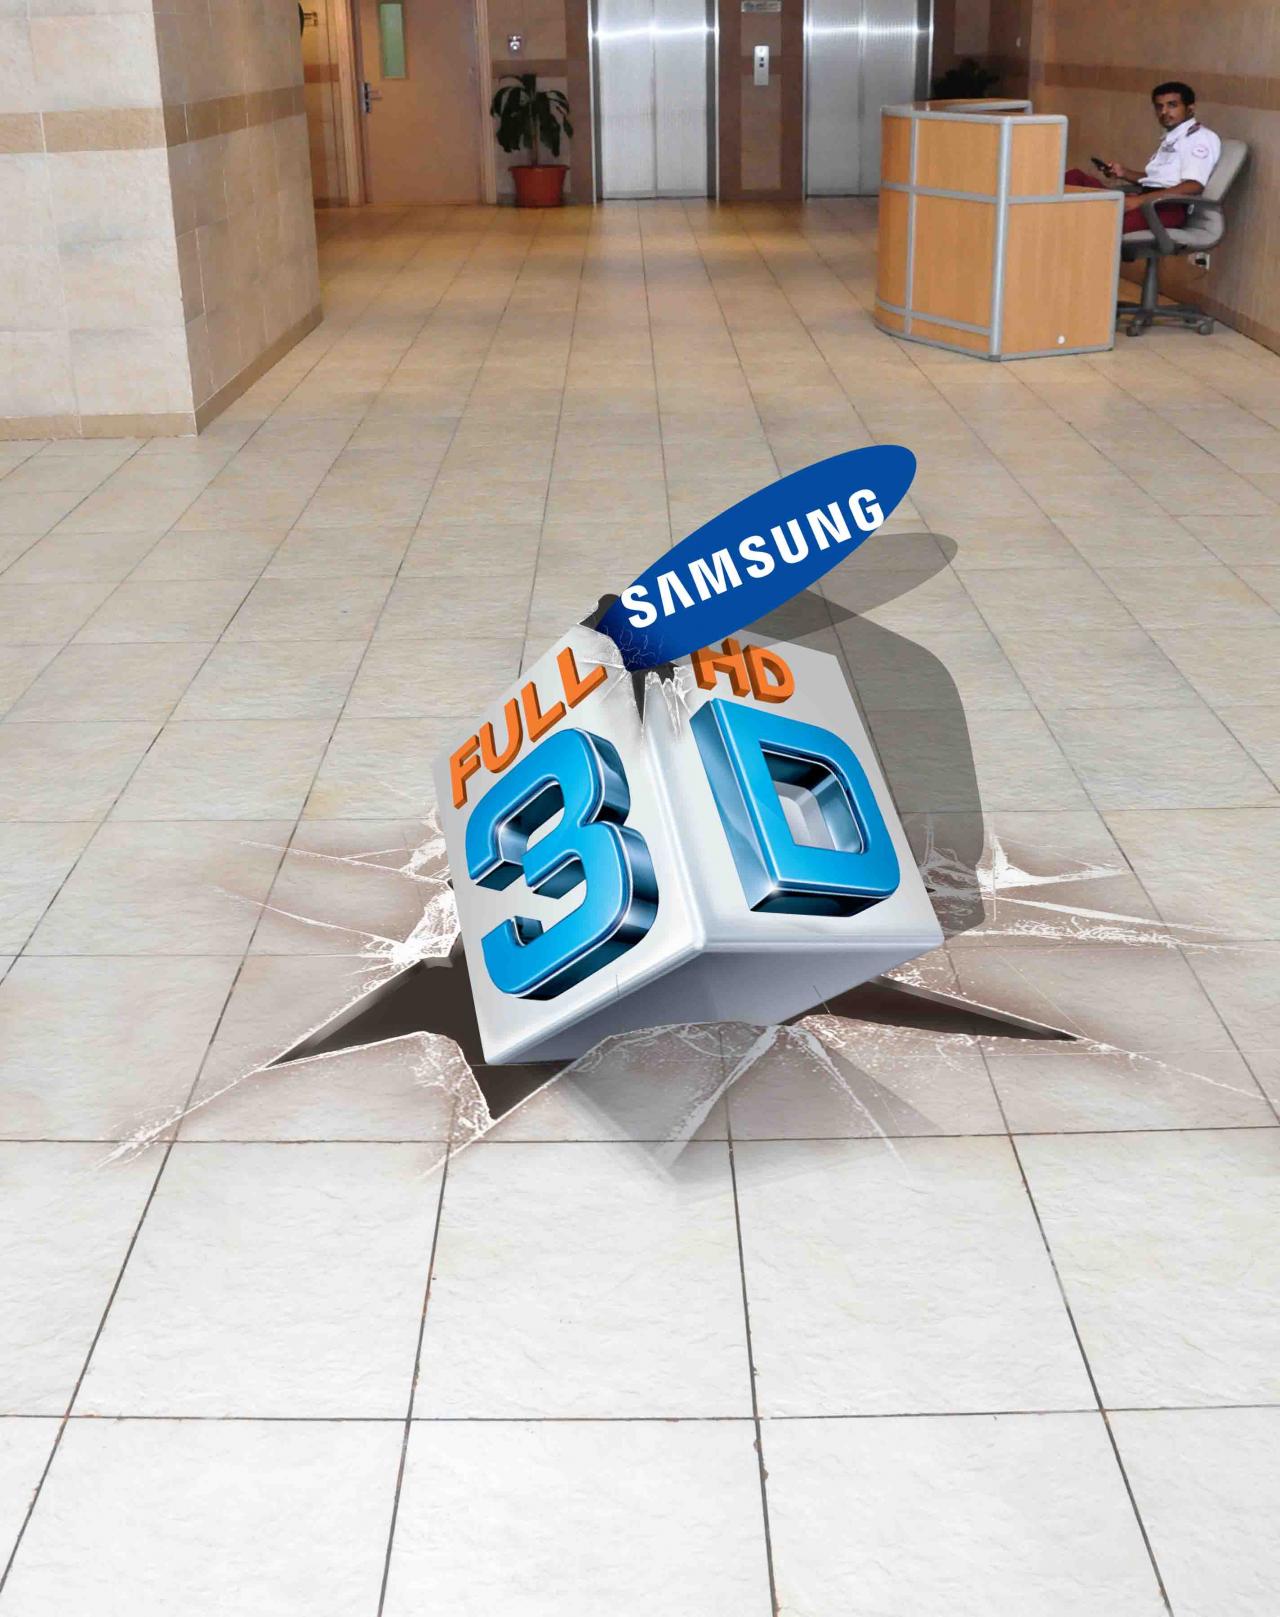 floor graphics graphic optical 3d signs decals decal floors window coolest creative samsung shree pool office